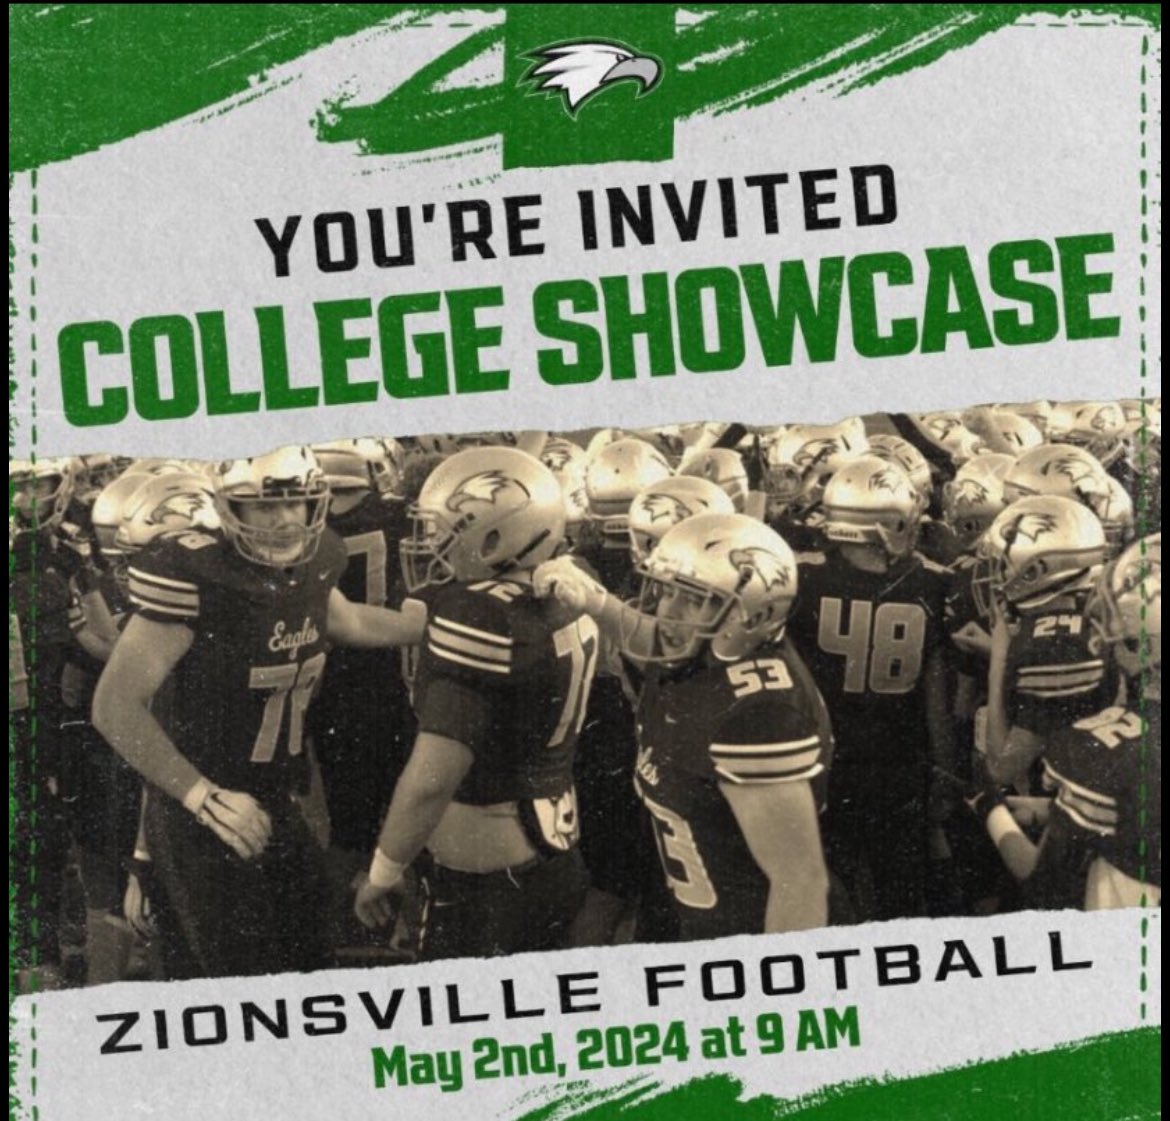 Excited to Compete at our College Showcase next Thursday, May 2nd! @Coach_Cush @CoachTurnquist @ZionsvilleFB @xfactorQB @CoachYoungXFQB